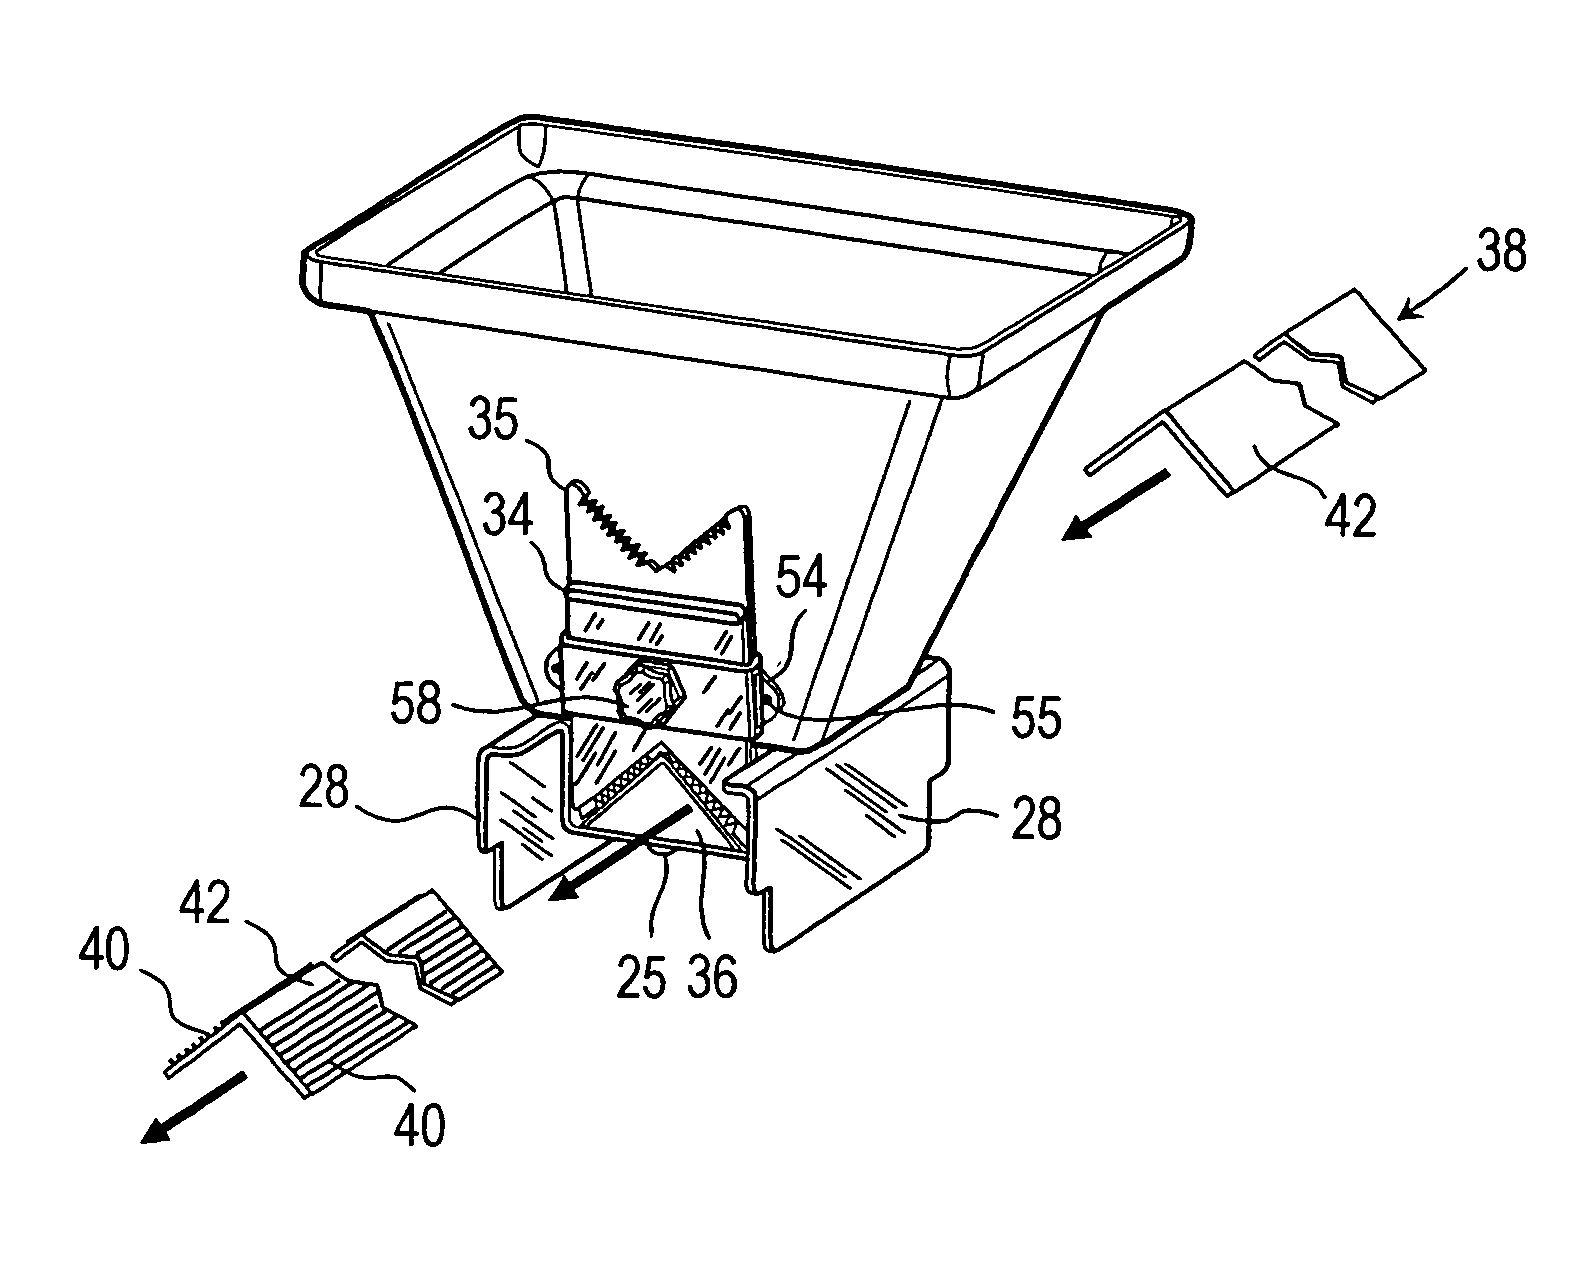 Hopper apparatus and method for application of joint compound to corner beads